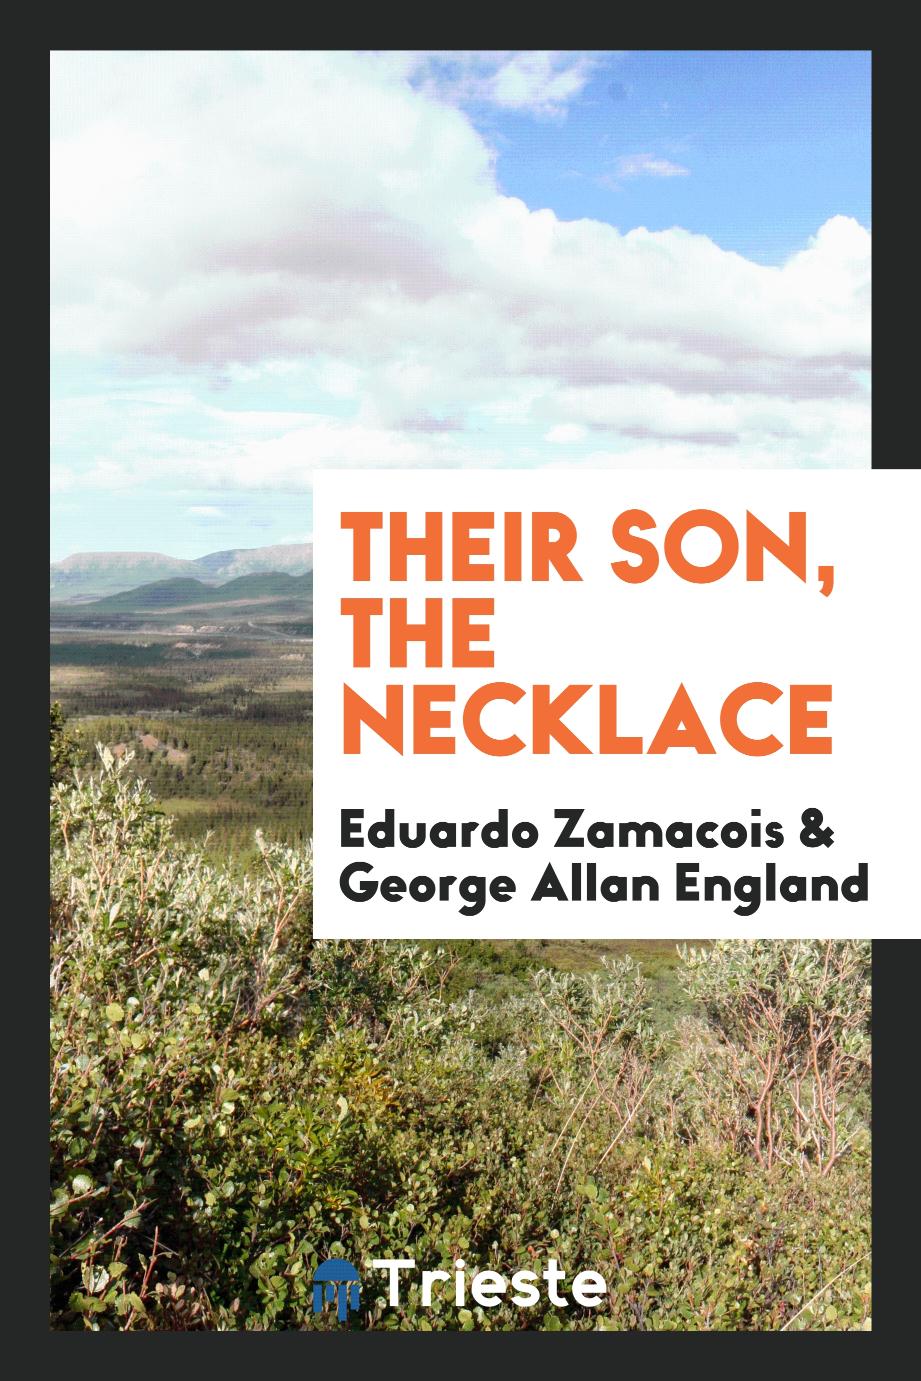 Their son, The necklace